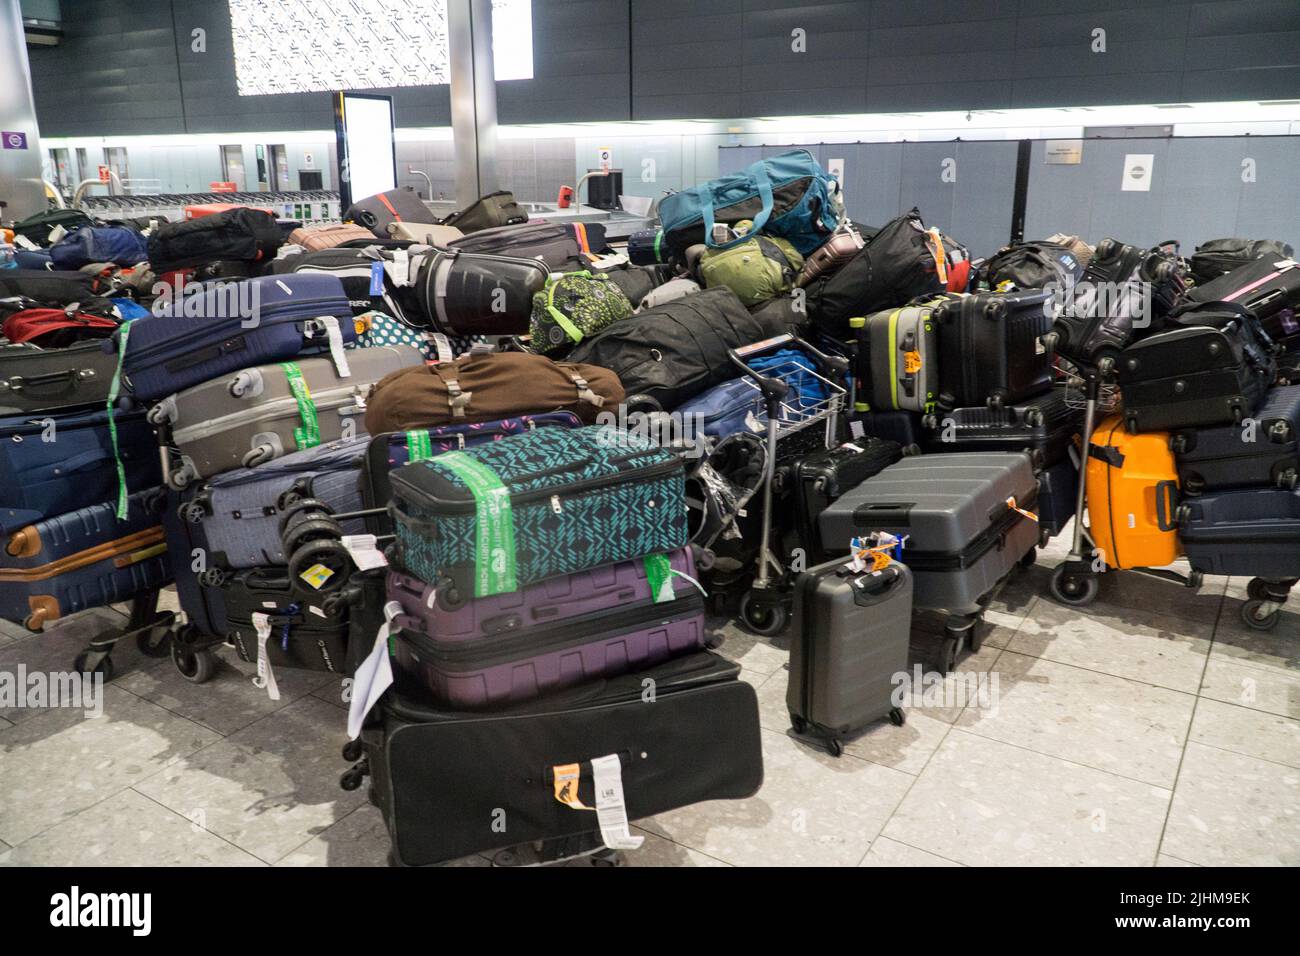 Heathrow, UK, 17 July 2022: A large number of checked suitcases separated from their owners at Heathrow airport Terminal 5. Anna Watson/Alamy Live News Stock Photo